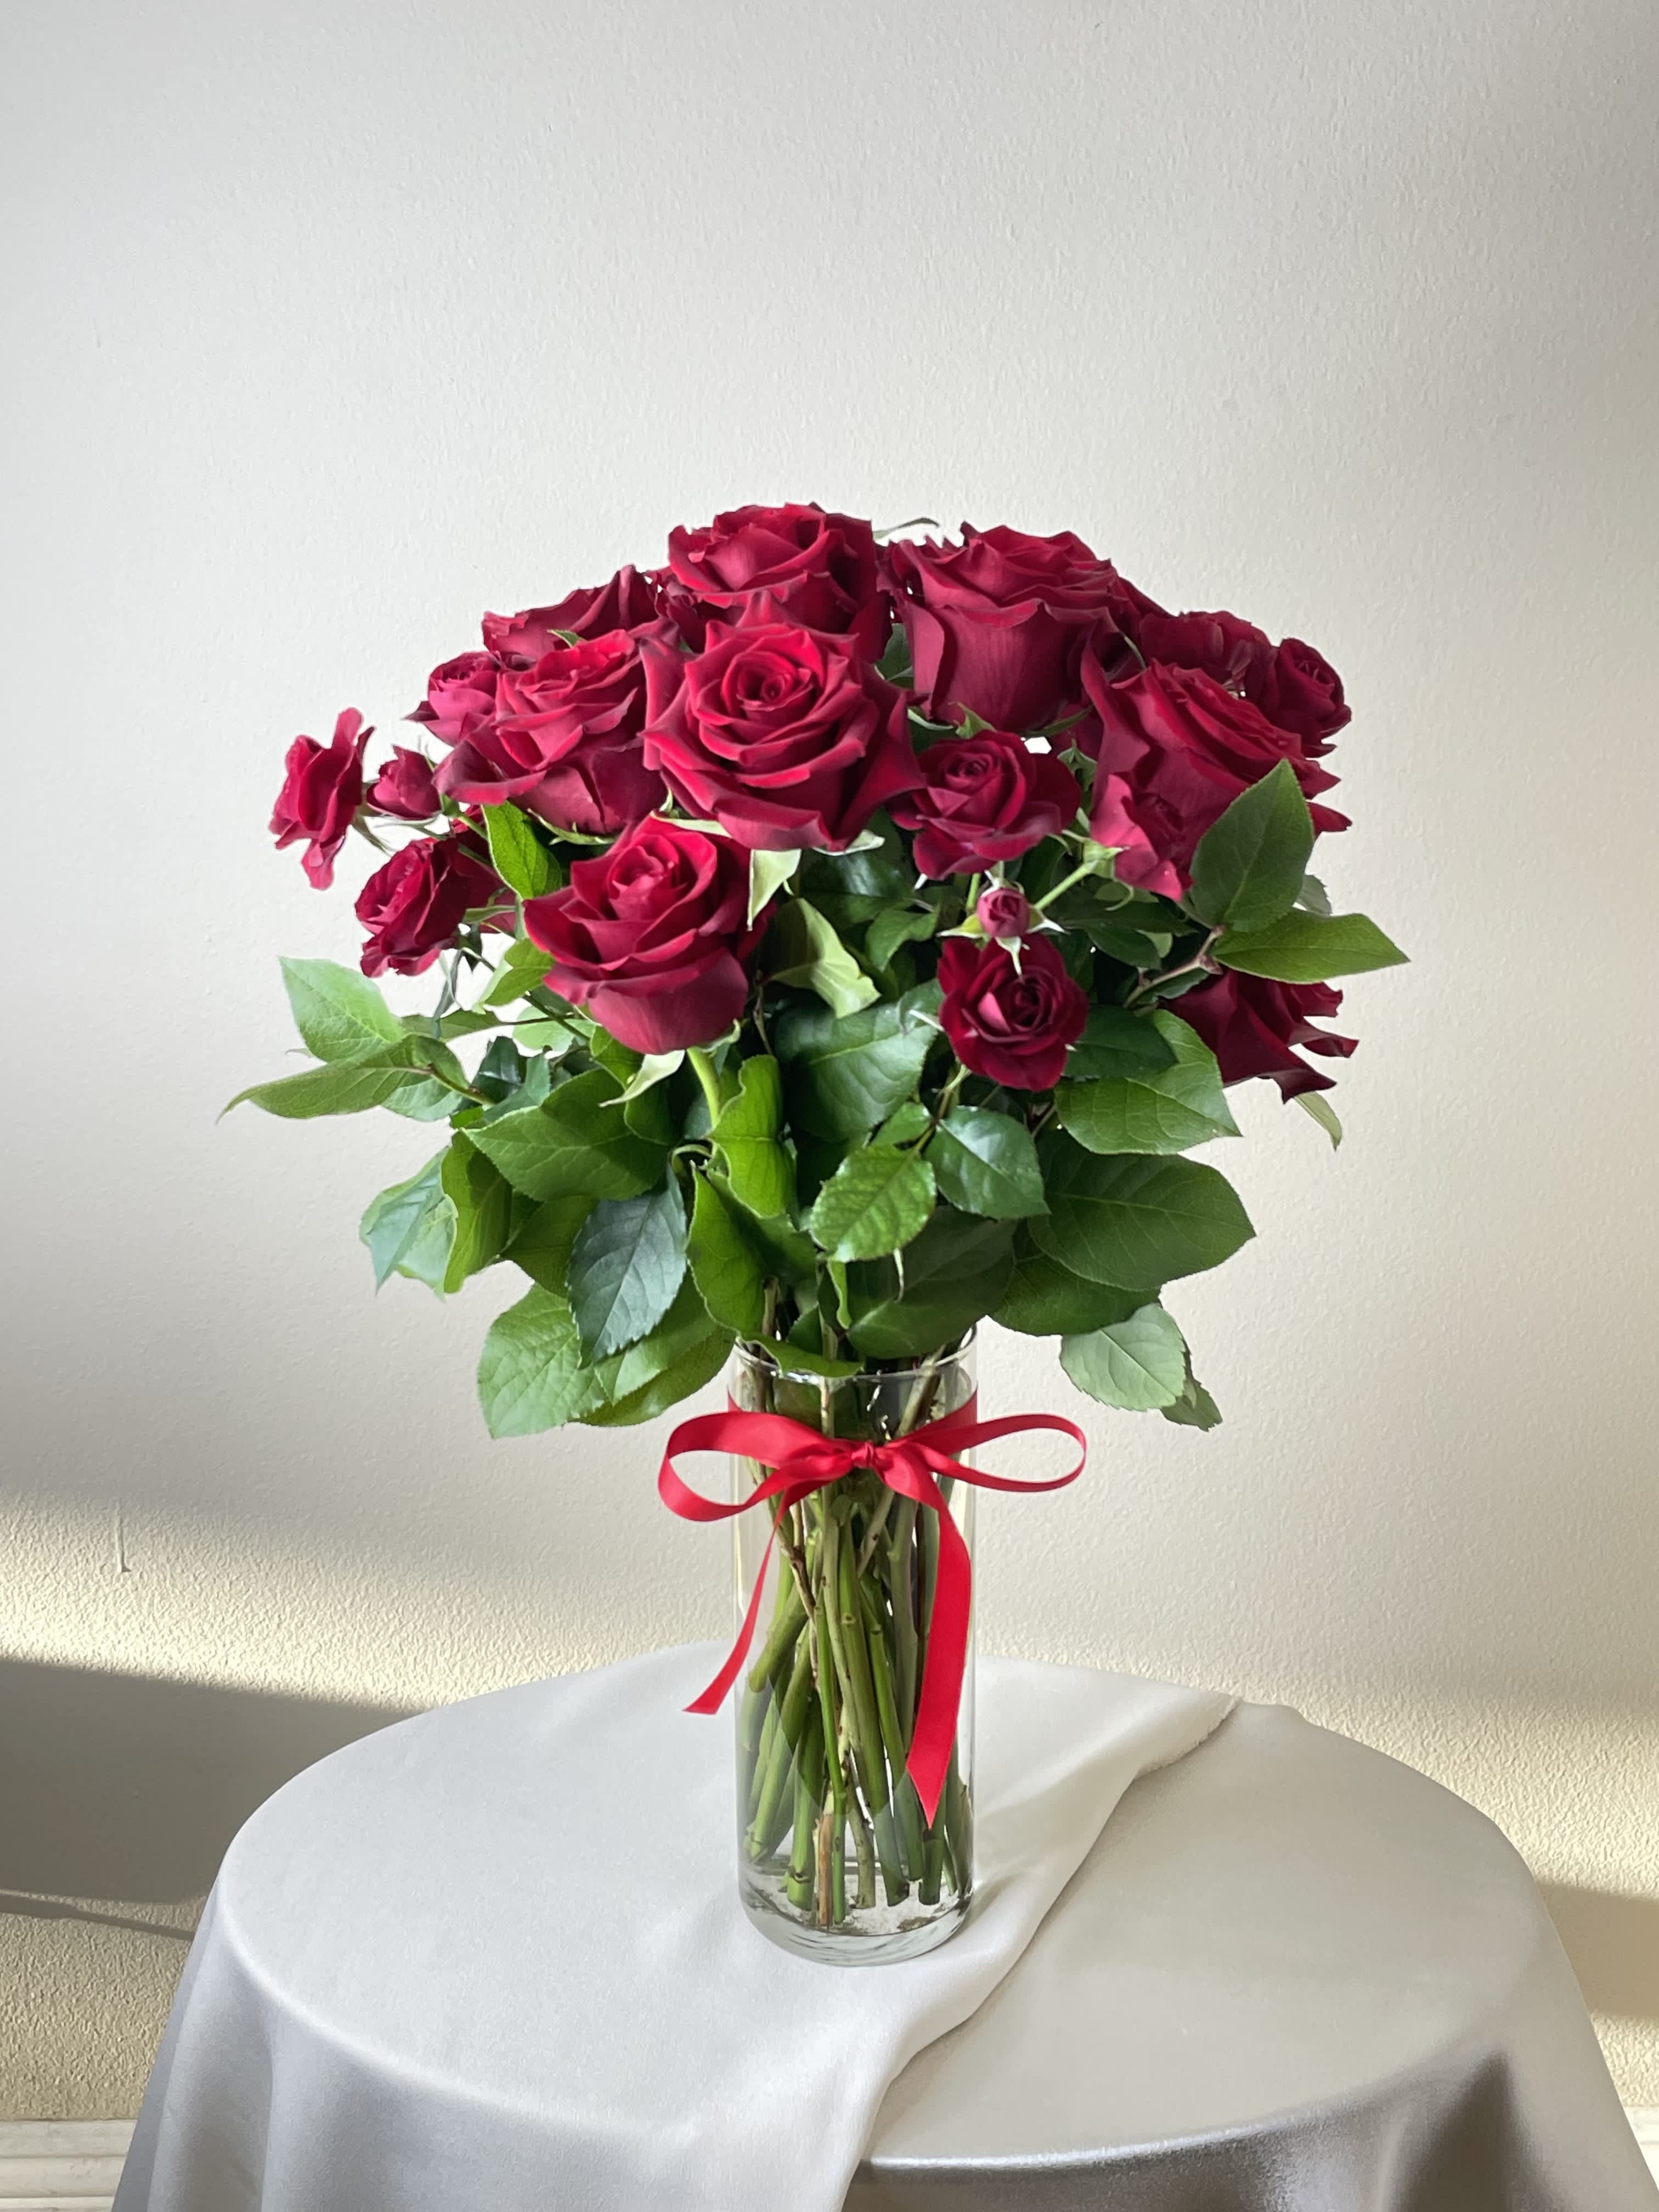 One Dozen Red Roses - One dozen red roses enhaned with red spray roses with greenery 	  Orientation: All-Around As Shown: IVF104 